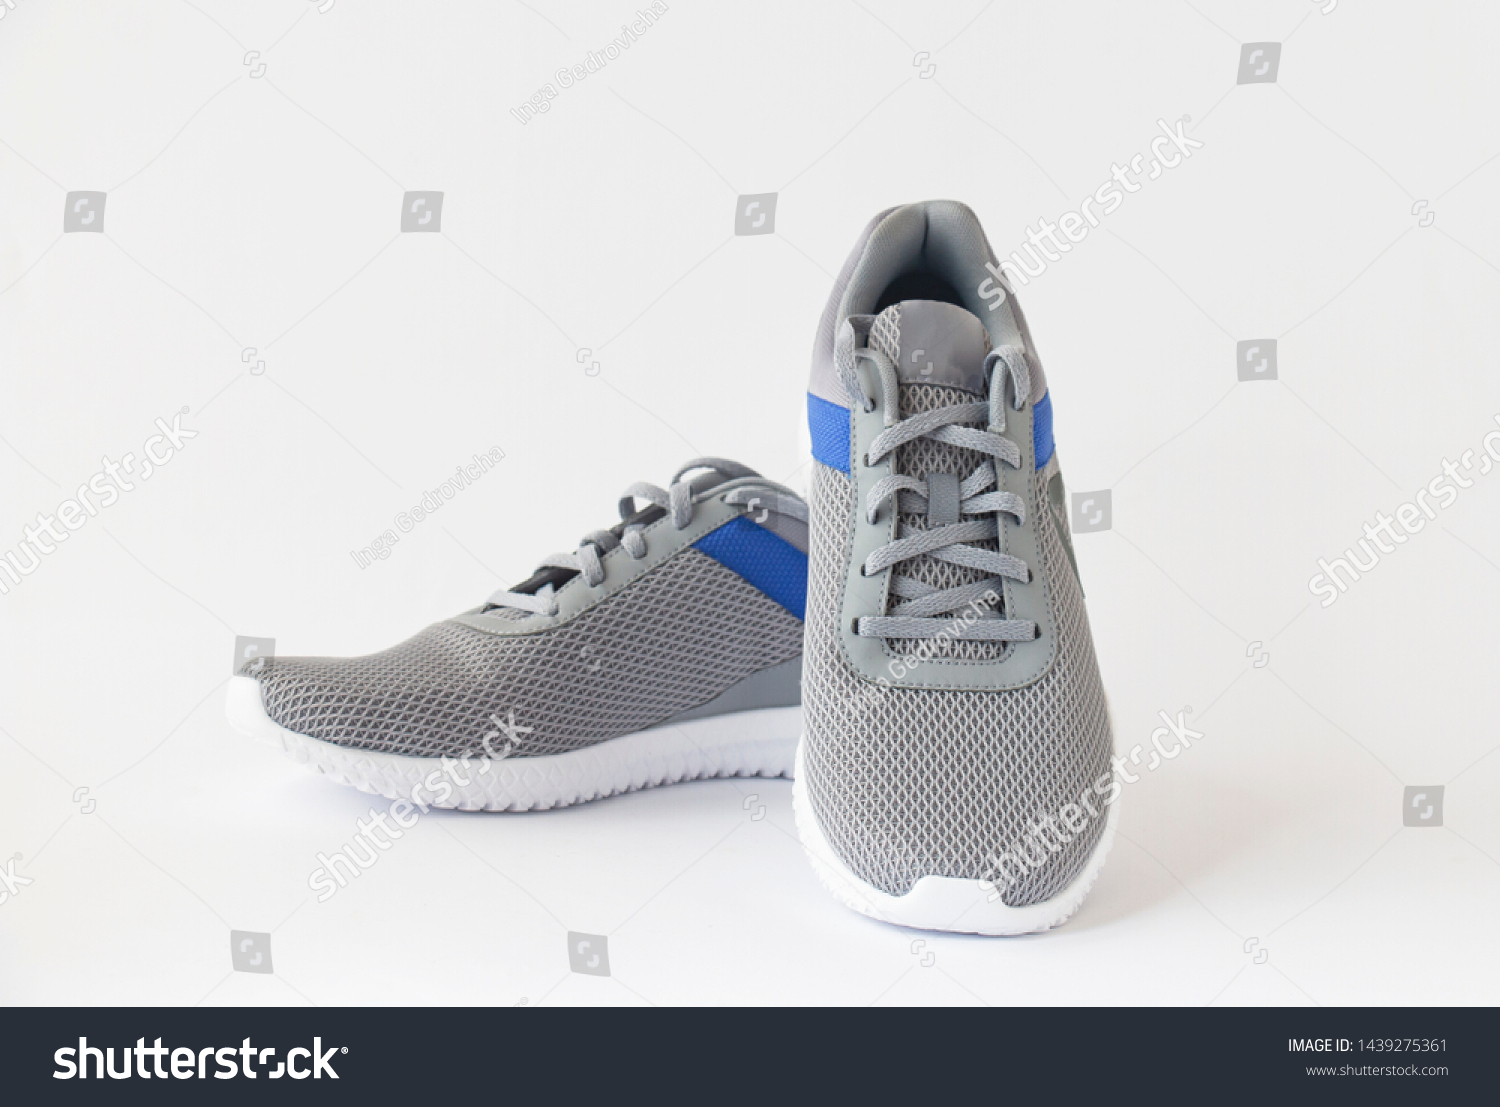 gray men's sneakers on a white background #1439275361